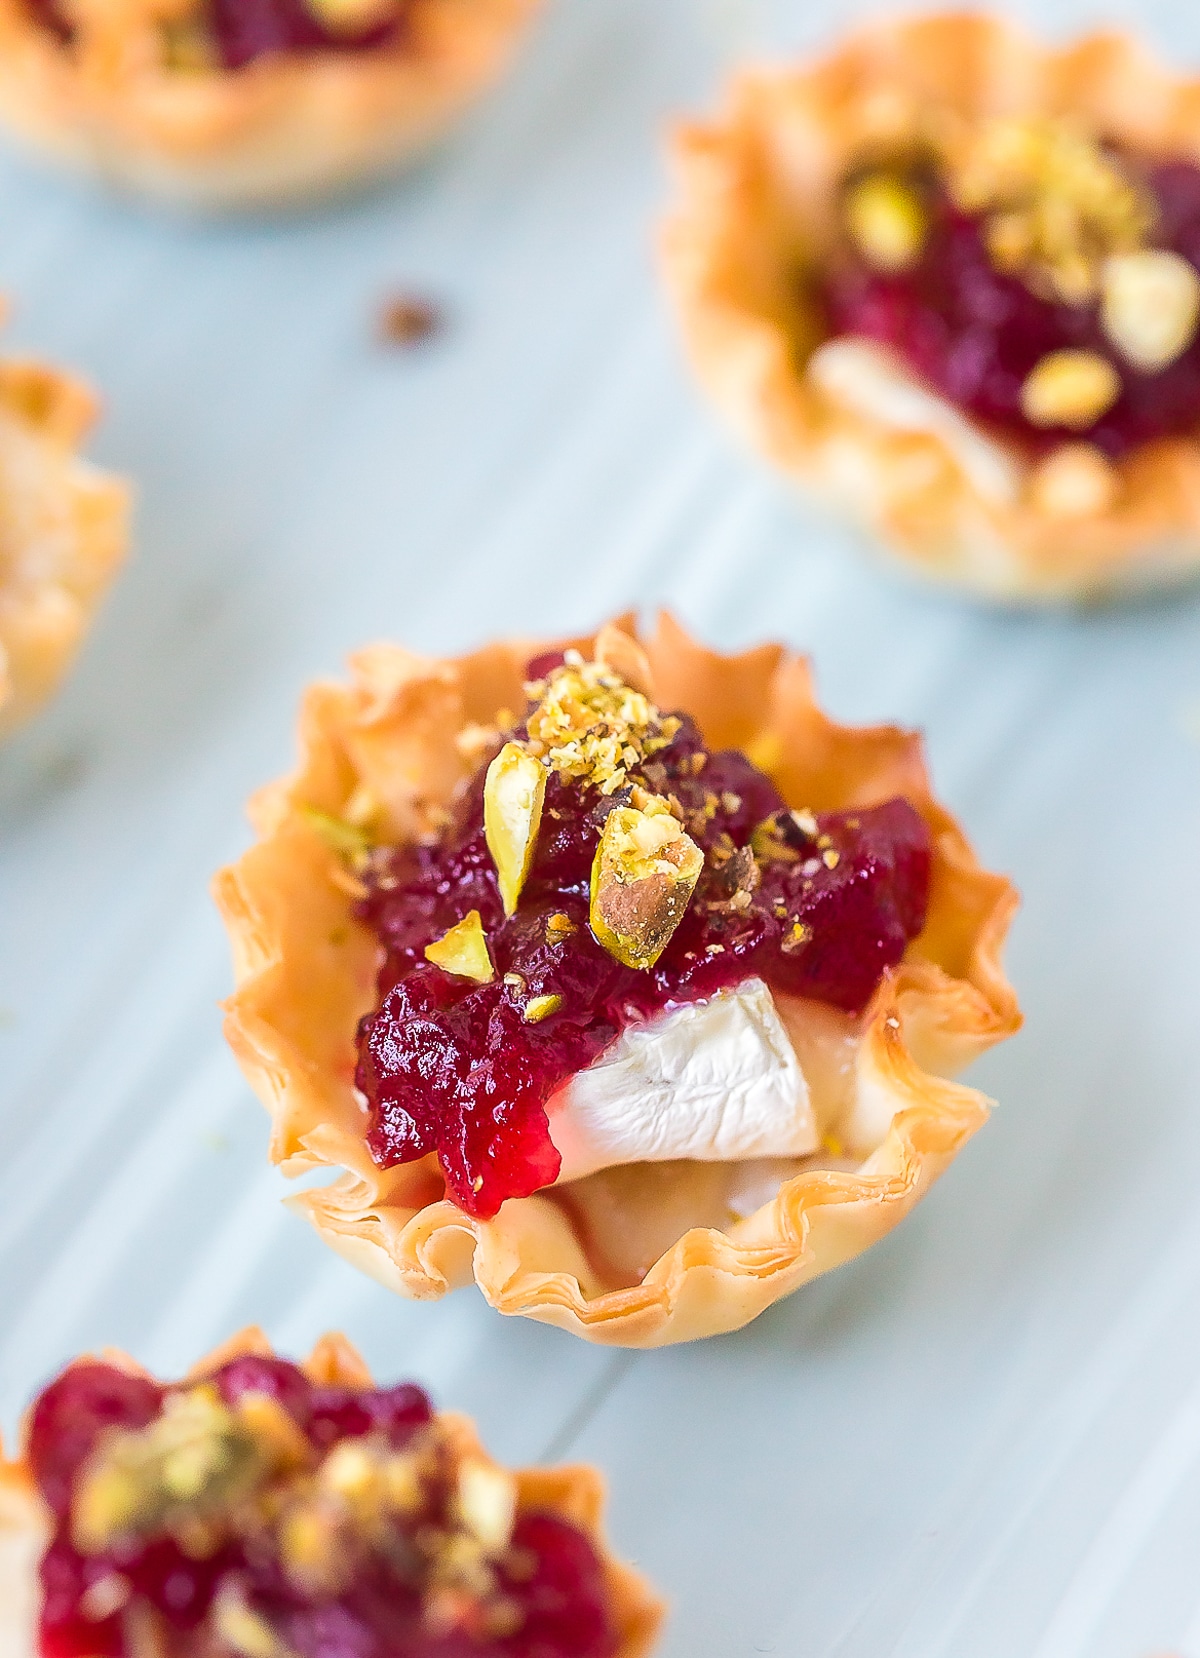 Easy Baked Brie Bites with Cranberry Sauce Recipe #ASpicyPerspective #brie #baked #cranberry 